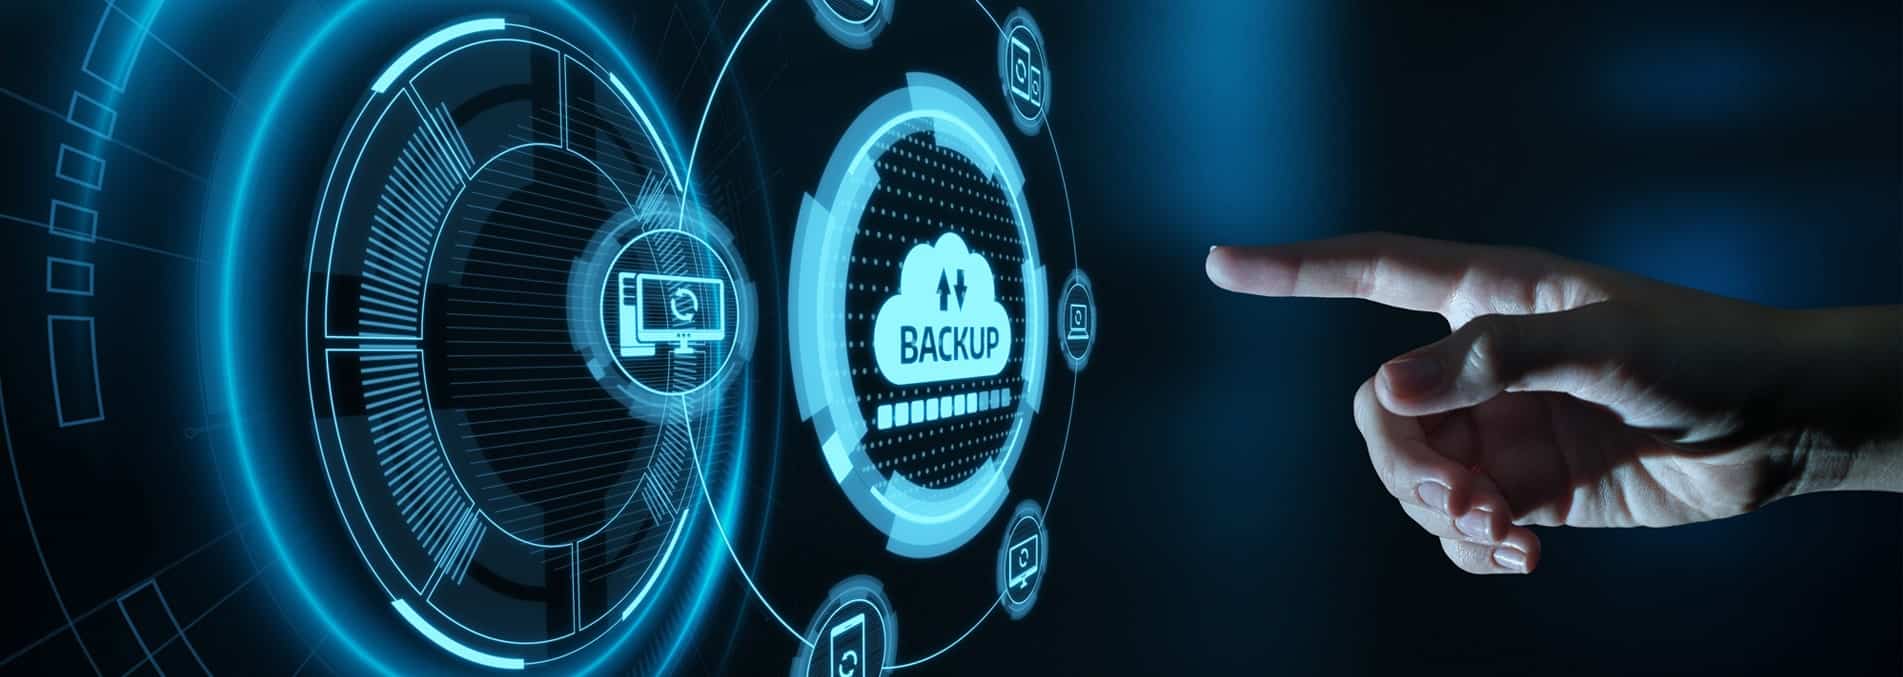 Data Backup as a service for SMBs